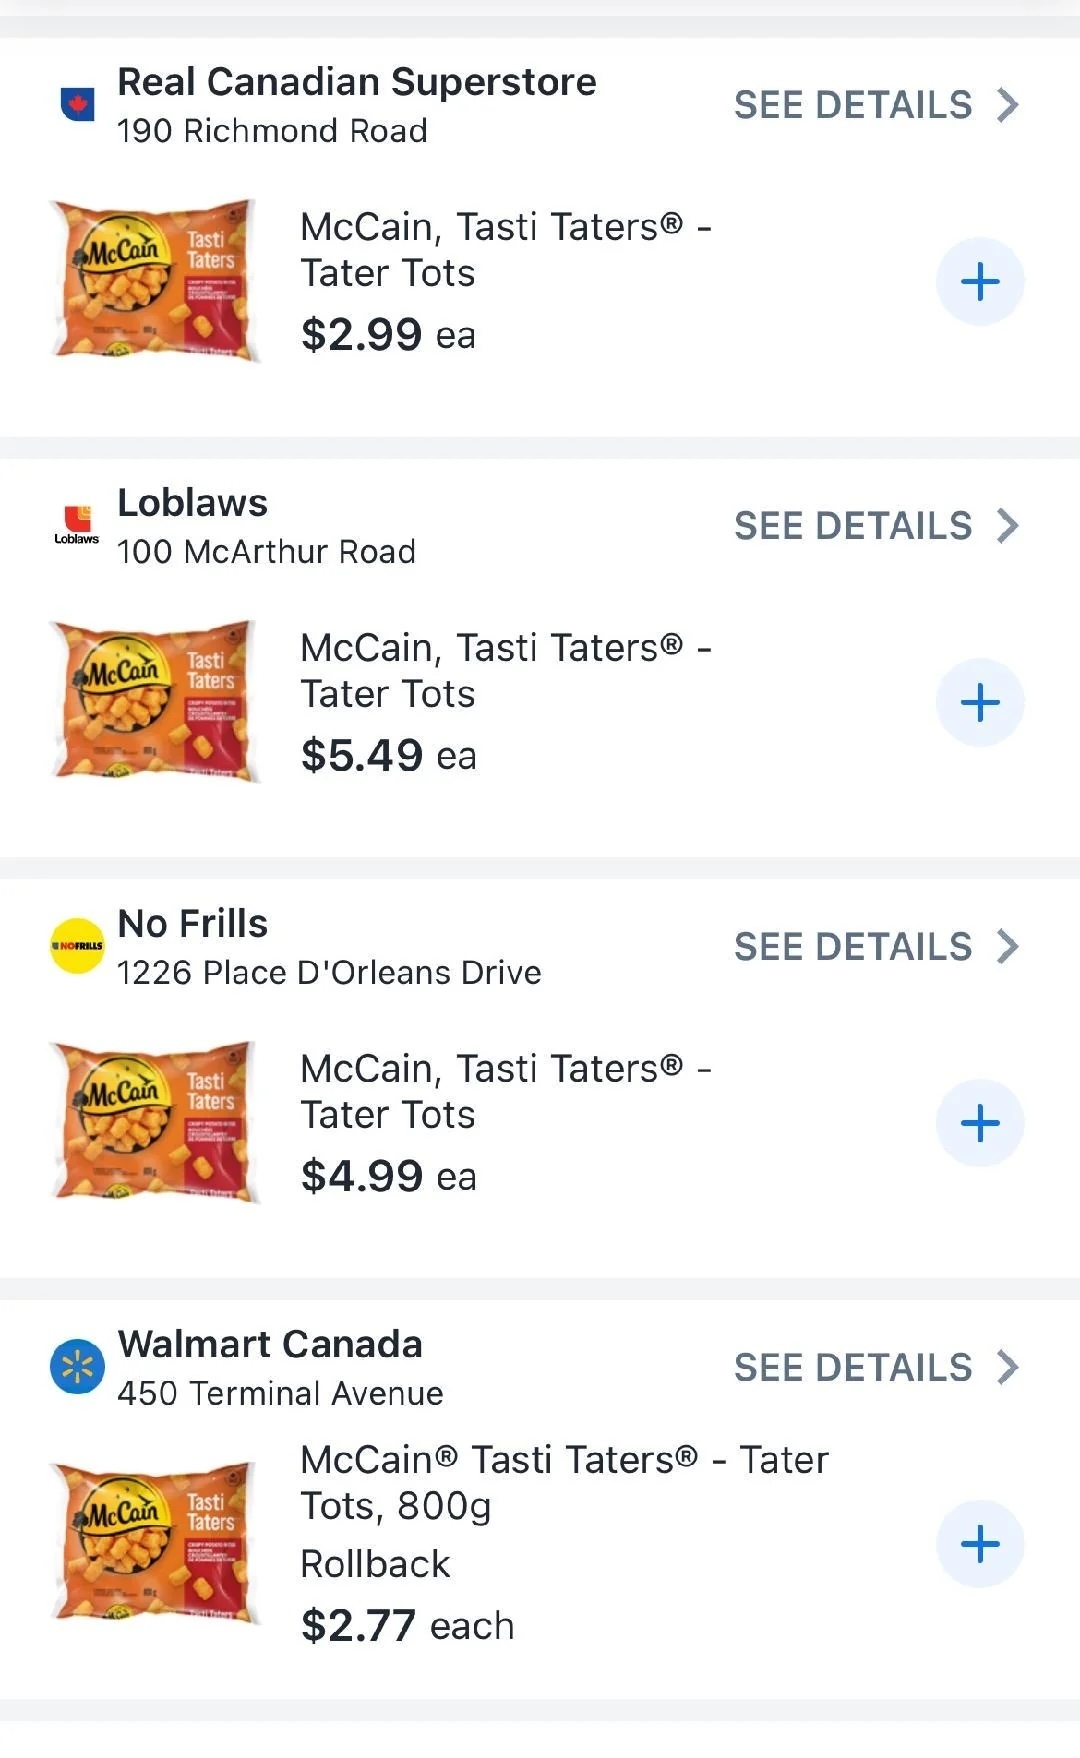 Four product listings for McCain Tasti Taters from different stores with prices and &quot;See Details&quot; links